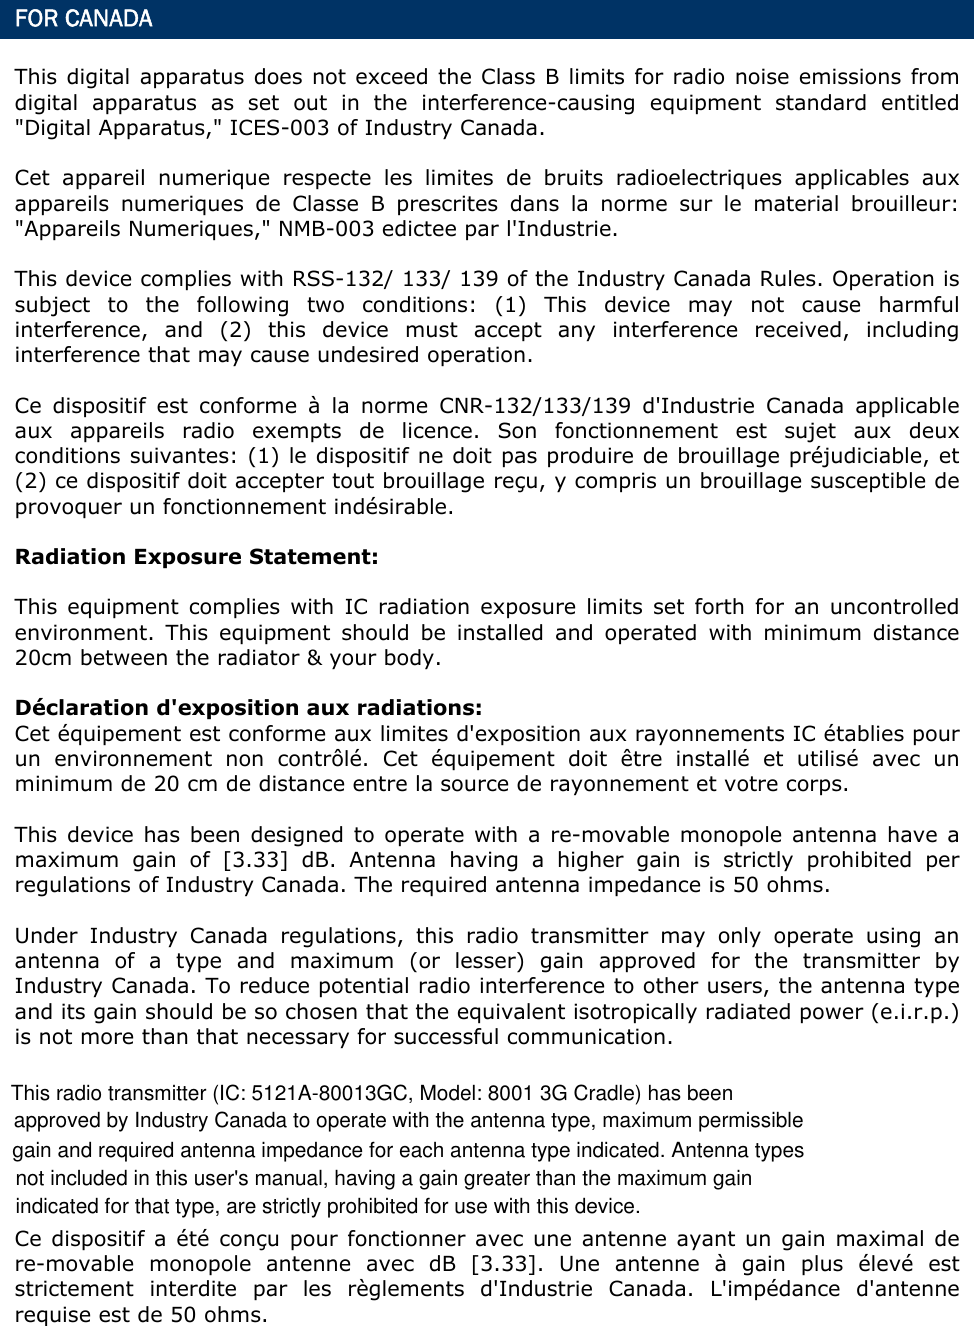  FOR CANADA This digital apparatus does not exceed the Class B limits for radio noise emissions from digital apparatus as set out in the interference-causing equipment standard entitled &quot;Digital Apparatus,&quot; ICES-003 of Industry Canada. Cet appareil numerique respecte les limites de bruits radioelectriques applicables aux appareils numeriques de Classe B prescrites dans la norme sur le material brouilleur: &quot;Appareils Numeriques,&quot; NMB-003 edictee par l&apos;Industrie. This device complies with RSS-132/ 133/ 139 of the Industry Canada Rules. Operation is subject to the following two conditions: (1) This device may not cause harmful interference, and (2) this device must accept any interference received, including interference that may cause undesired operation. Ce dispositif est conforme à la norme CNR-132/133/139 d&apos;Industrie Canada applicable aux appareils radio exempts de licence. Son fonctionnement est sujet aux deux conditions suivantes: (1) le dispositif ne doit pas produire de brouillage préjudiciable, et (2) ce dispositif doit accepter tout brouillage reçu, y compris un brouillage susceptible de provoquer un fonctionnement indésirable.   Radiation Exposure Statement: This equipment complies with IC radiation exposure limits set forth for an uncontrolled environment. This equipment should be installed and operated with minimum distance 20cm between the radiator &amp; your body. Déclaration d&apos;exposition aux radiations: Cet équipement est conforme aux limites d&apos;exposition aux rayonnements IC établies pour un environnement non contrôlé. Cet équipement doit être installé et utilisé avec un minimum de 20 cm de distance entre la source de rayonnement et votre corps. This device has been designed to operate with a re-movable monopole antenna have a maximum gain of [3.33] dB. Antenna having a higher gain is strictly prohibited per regulations of Industry Canada. The required antenna impedance is 50 ohms. Under Industry Canada regulations, this radio transmitter may only operate using an antenna of a type and maximum (or lesser) gain approved for the transmitter by Industry Canada. To reduce potential radio interference to other users, the antenna type and its gain should be so chosen that the equivalent isotropically radiated power (e.i.r.p.) is not more than that necessary for successful communication. Ce dispositif a été conçu pour fonctionner avec une antenne ayant un gain maximal de re-movable monopole antenne avec dB [3.33]. Une antenne à gain plus élevé est strictement interdite par les règlements d&apos;Industrie Canada. L&apos;impédance d&apos;antenne requise est de 50 ohms. This radio transmitter (IC: 5121A-80013GC, Model: 8001 3G Cradle) has beenapproved by Industry Canada to operate with the antenna type, maximum permissiblegain and required antenna impedance for each antenna type indicated. Antenna types not included in this user&apos;s manual, having a gain greater than the maximum gain indicated for that type, are strictly prohibited for use with this device.